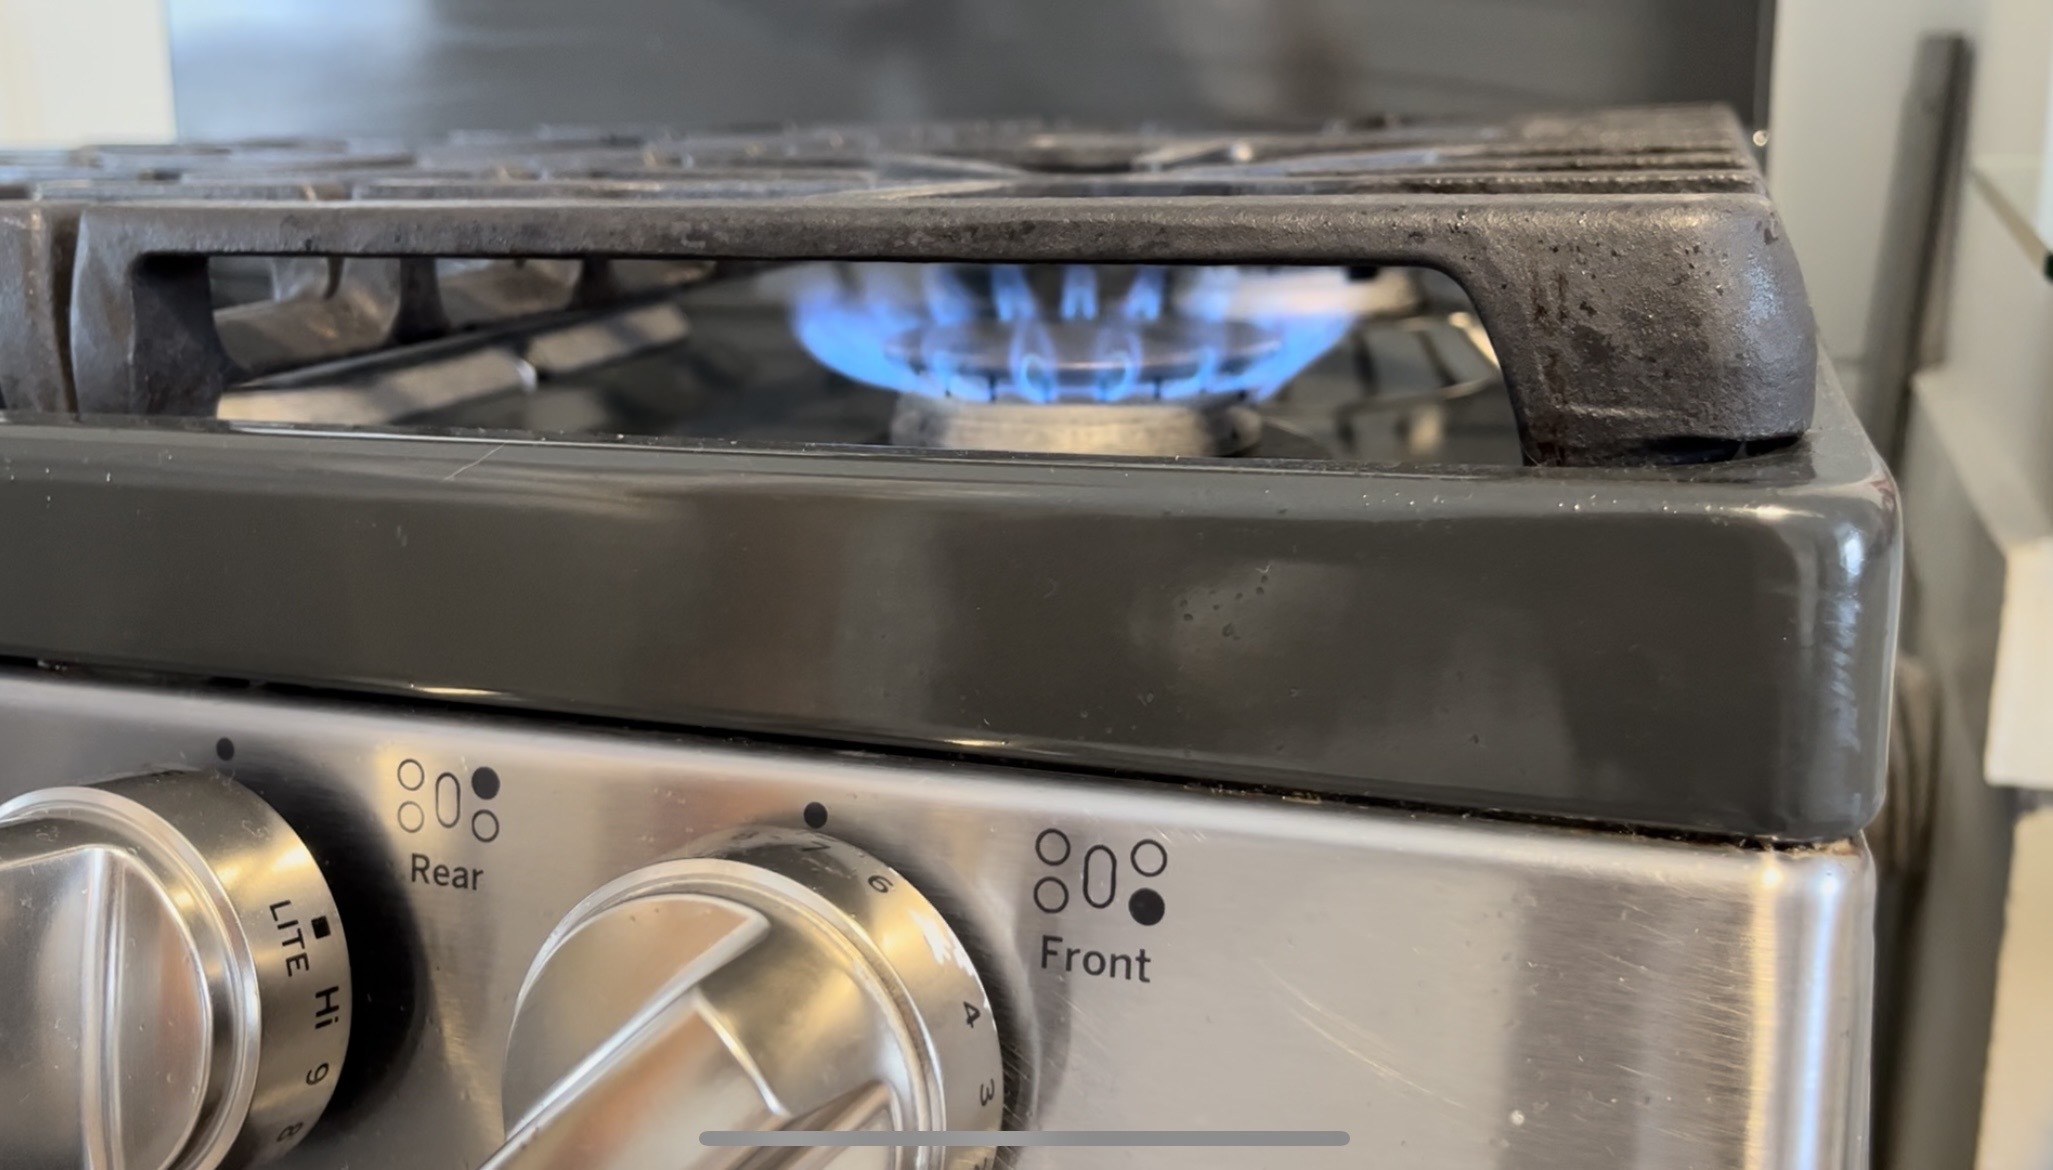 Gas vs. Electric Stoves? A Kitchen Expert Weighs In - The Allegheny Front